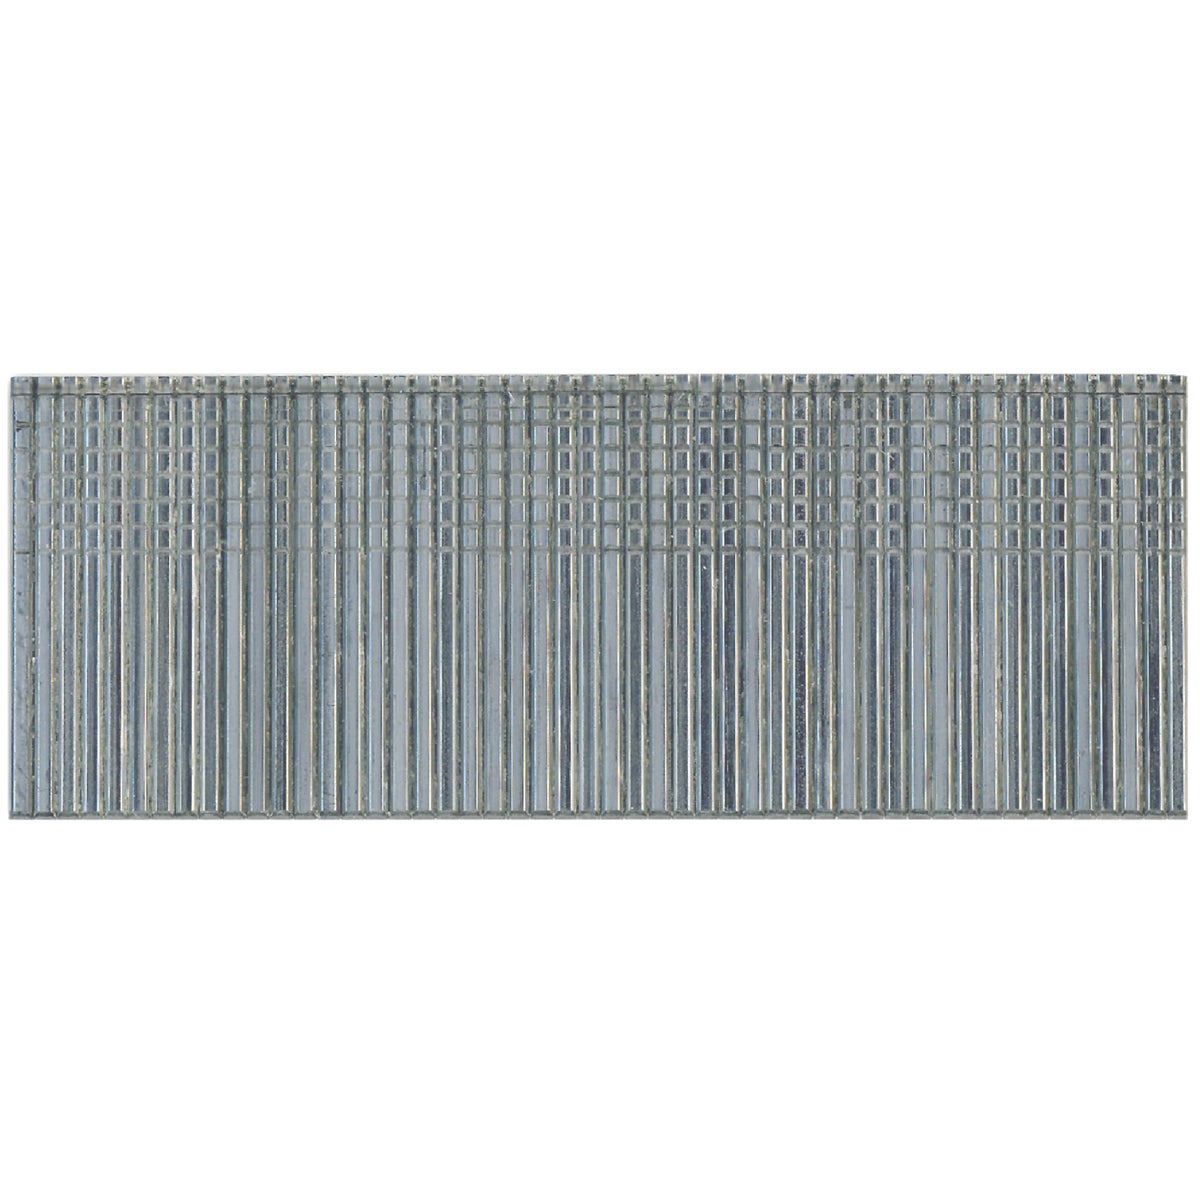 Item 366124, Straight finish nails used for furniture, baseboards, cabinets, crown 